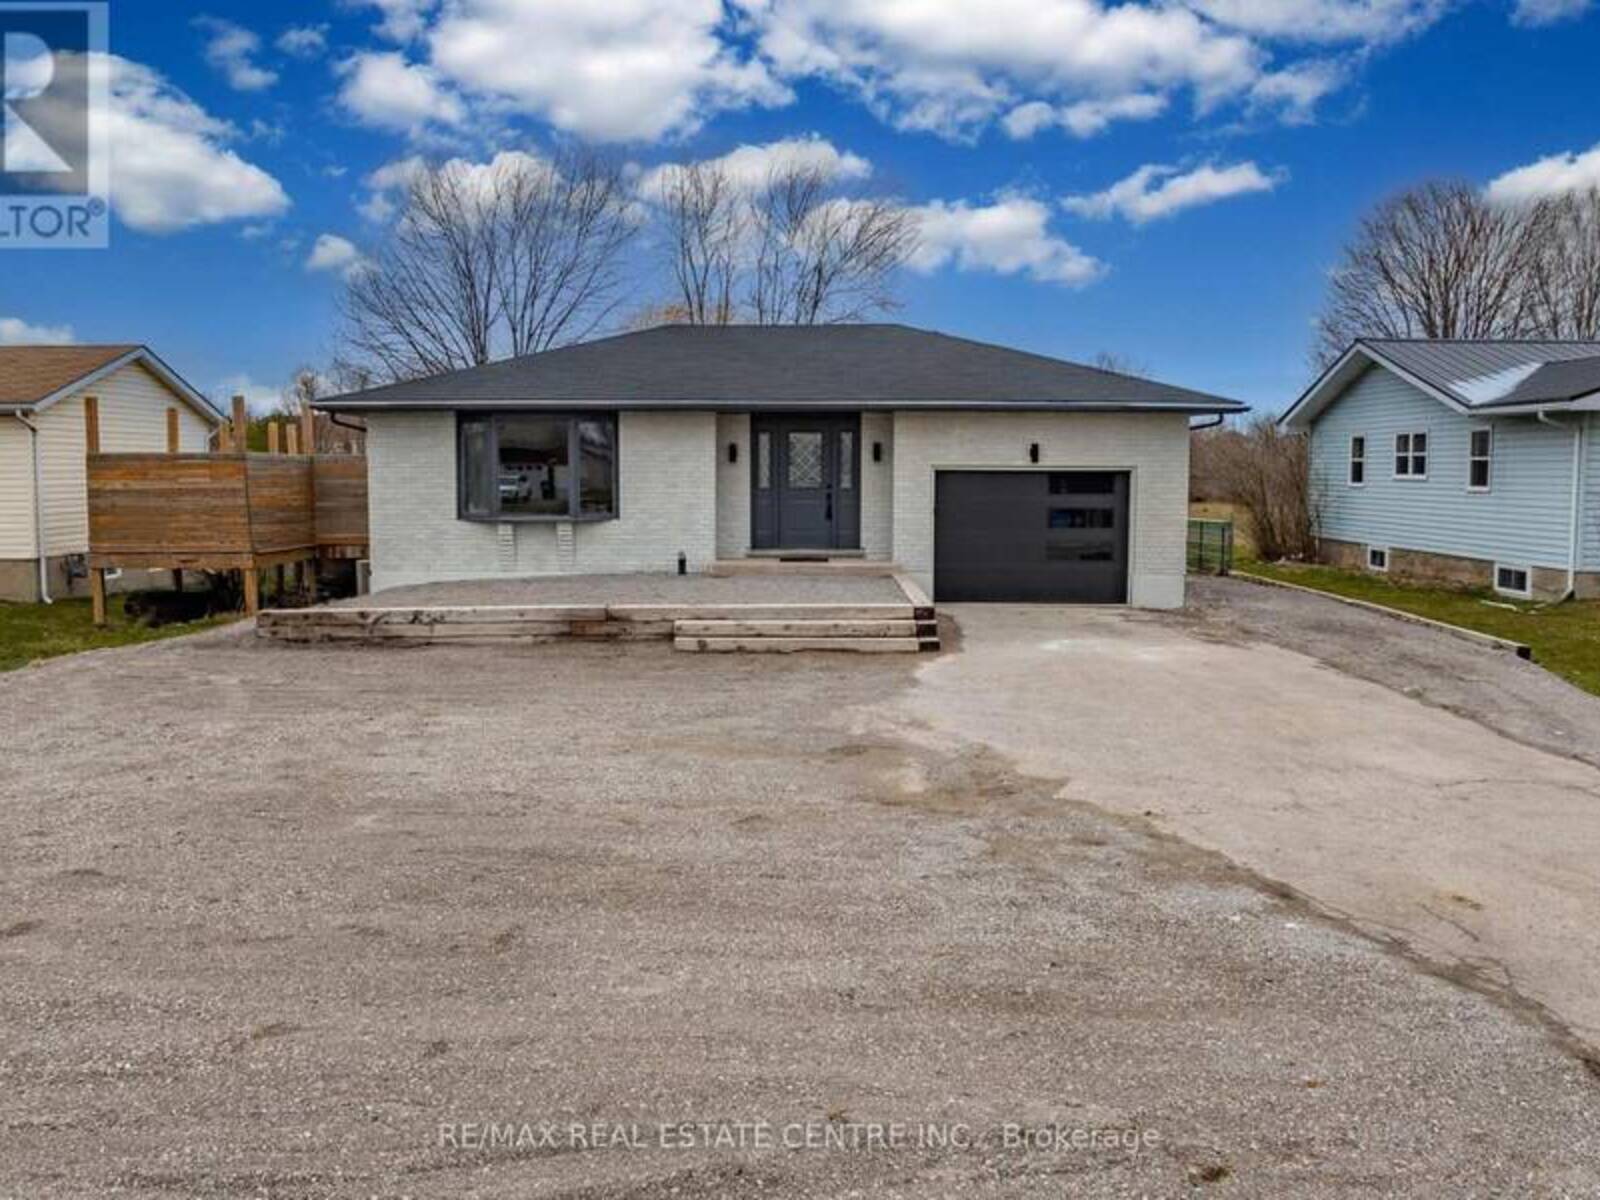 7536 COUNTY 91 RD, Clearview, Ontario L0M 1S0